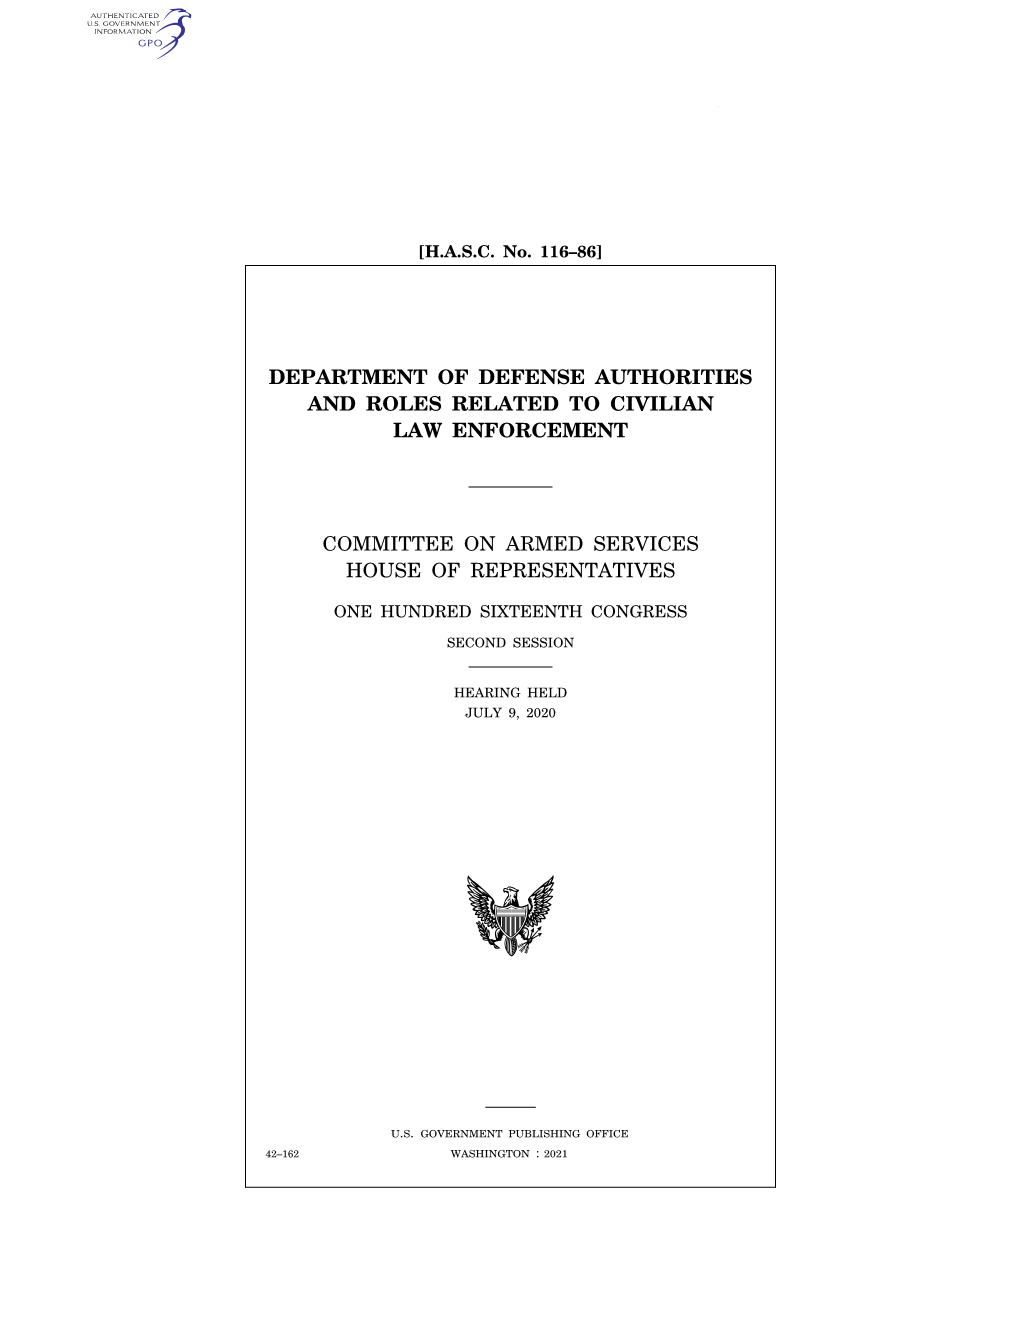 Department of Defense Authorities and Roles Related to Civilian Law Enforcement Committee on Armed Services House of Representat